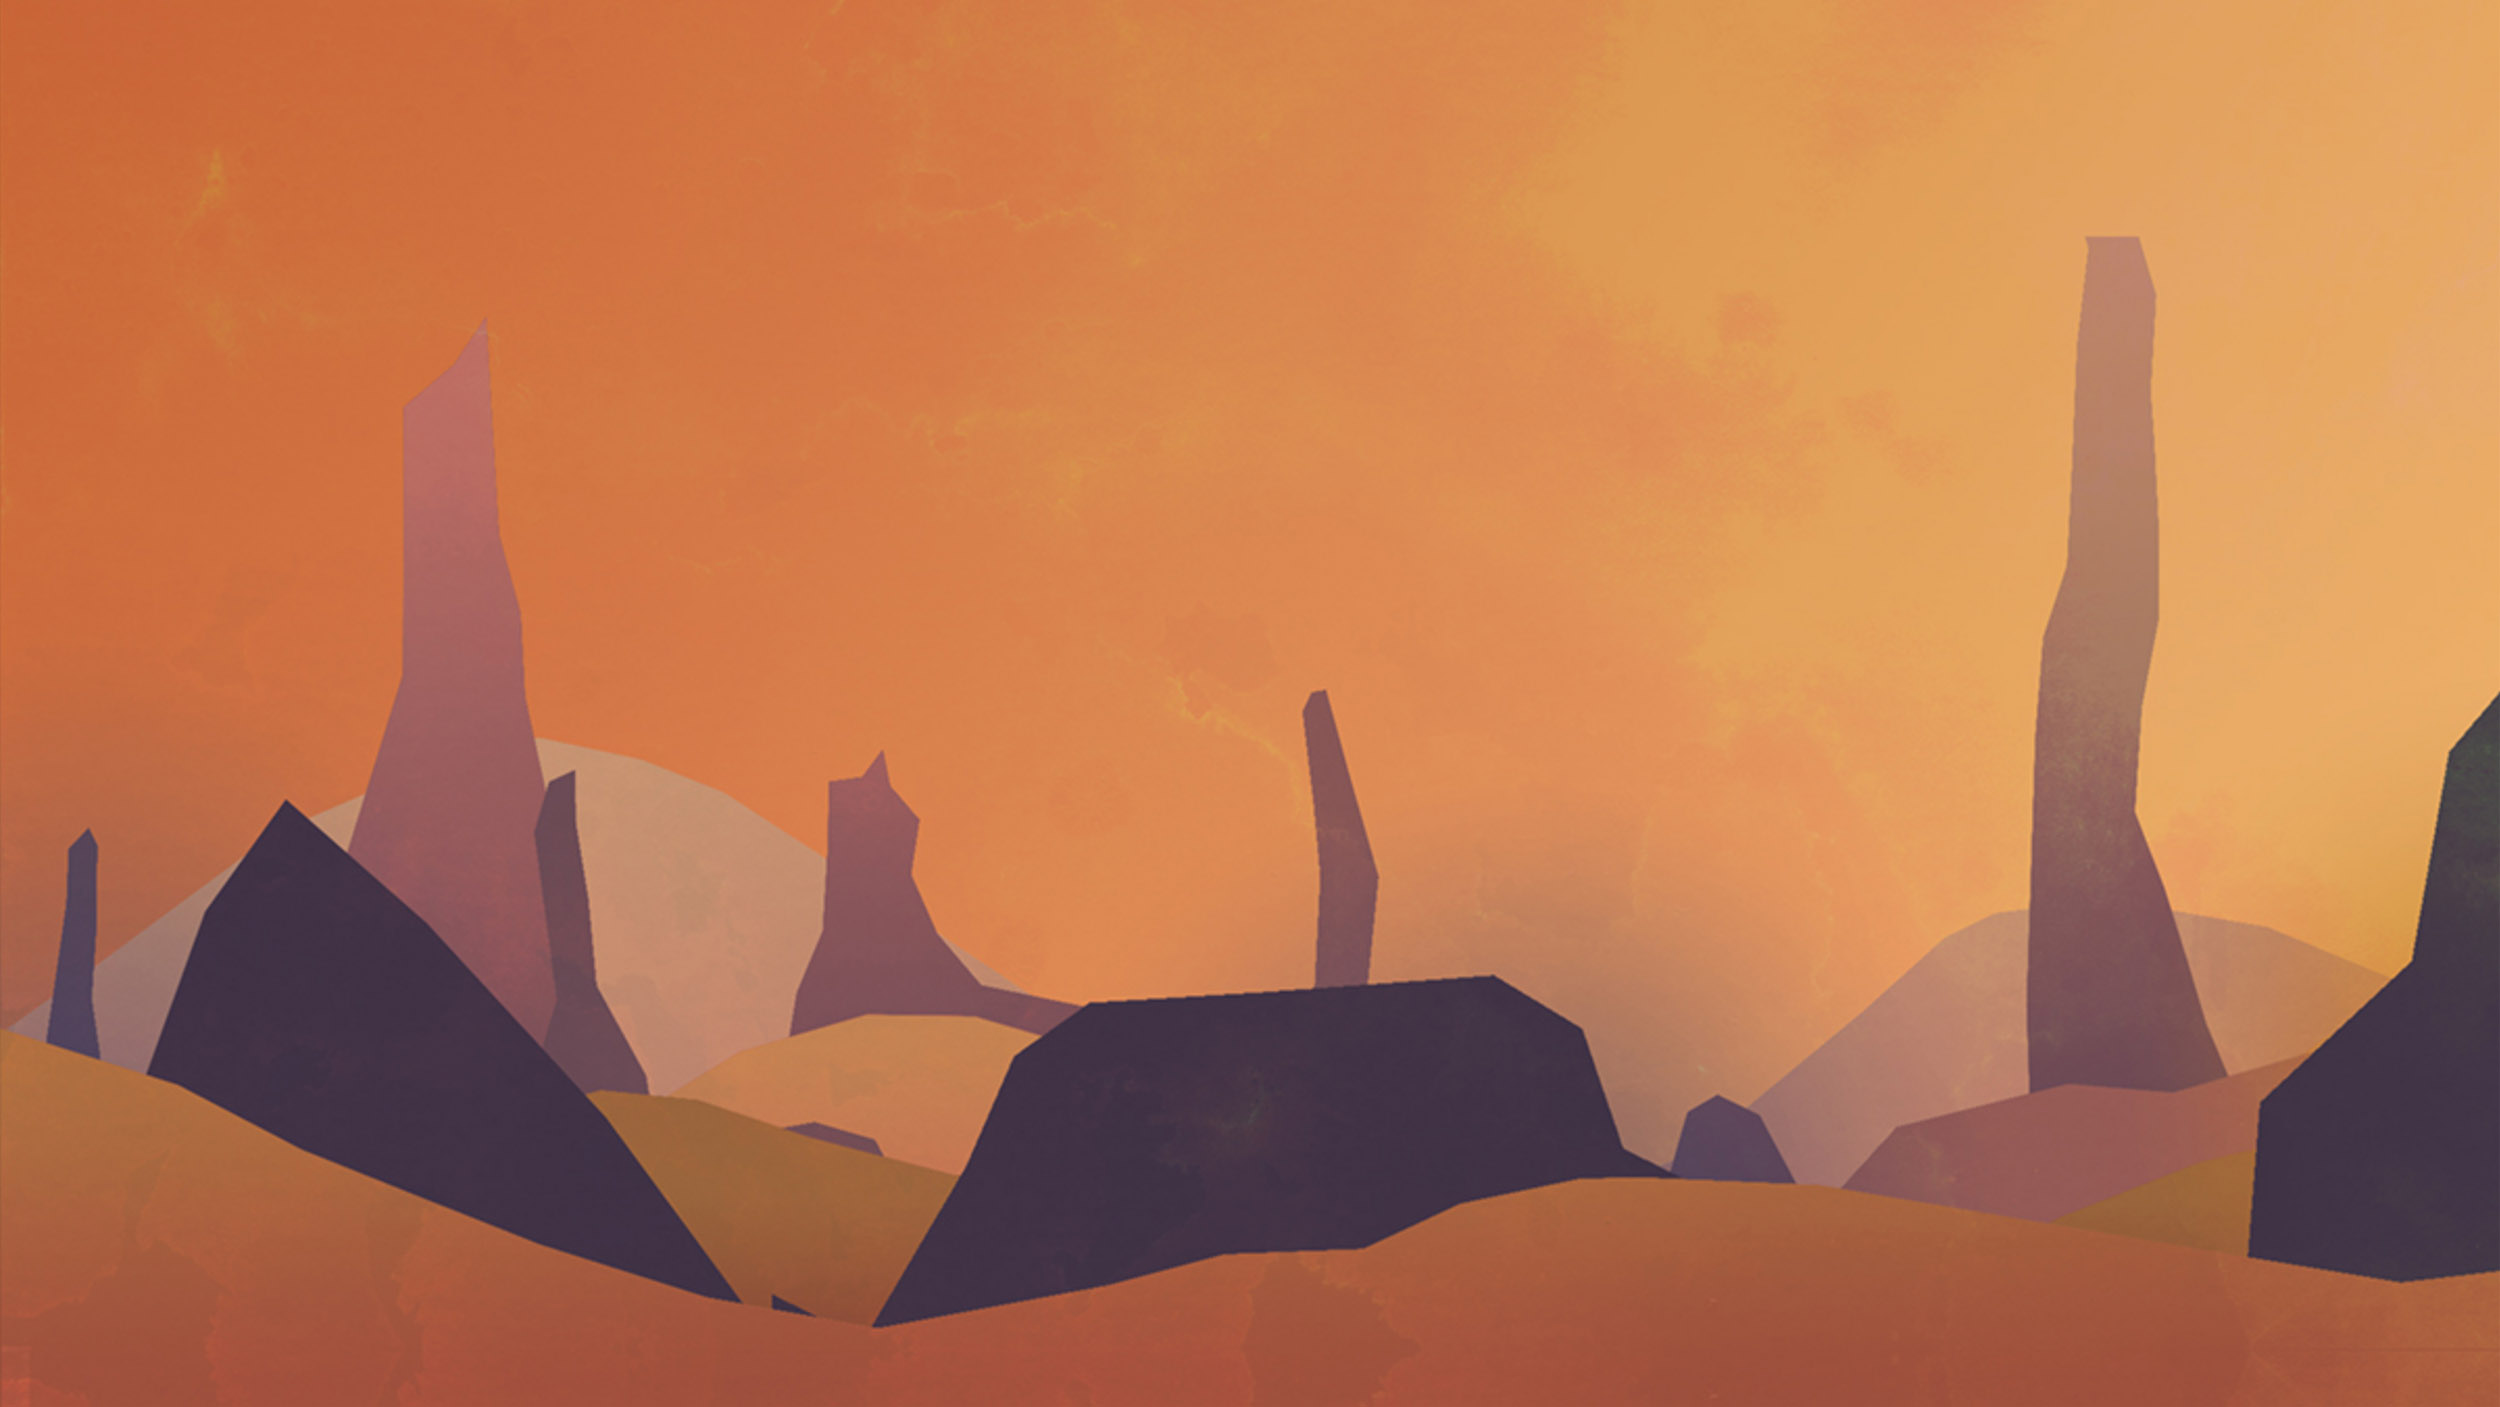 Digital illustration of desert mountains, with a red and orange gradient sunset in the background